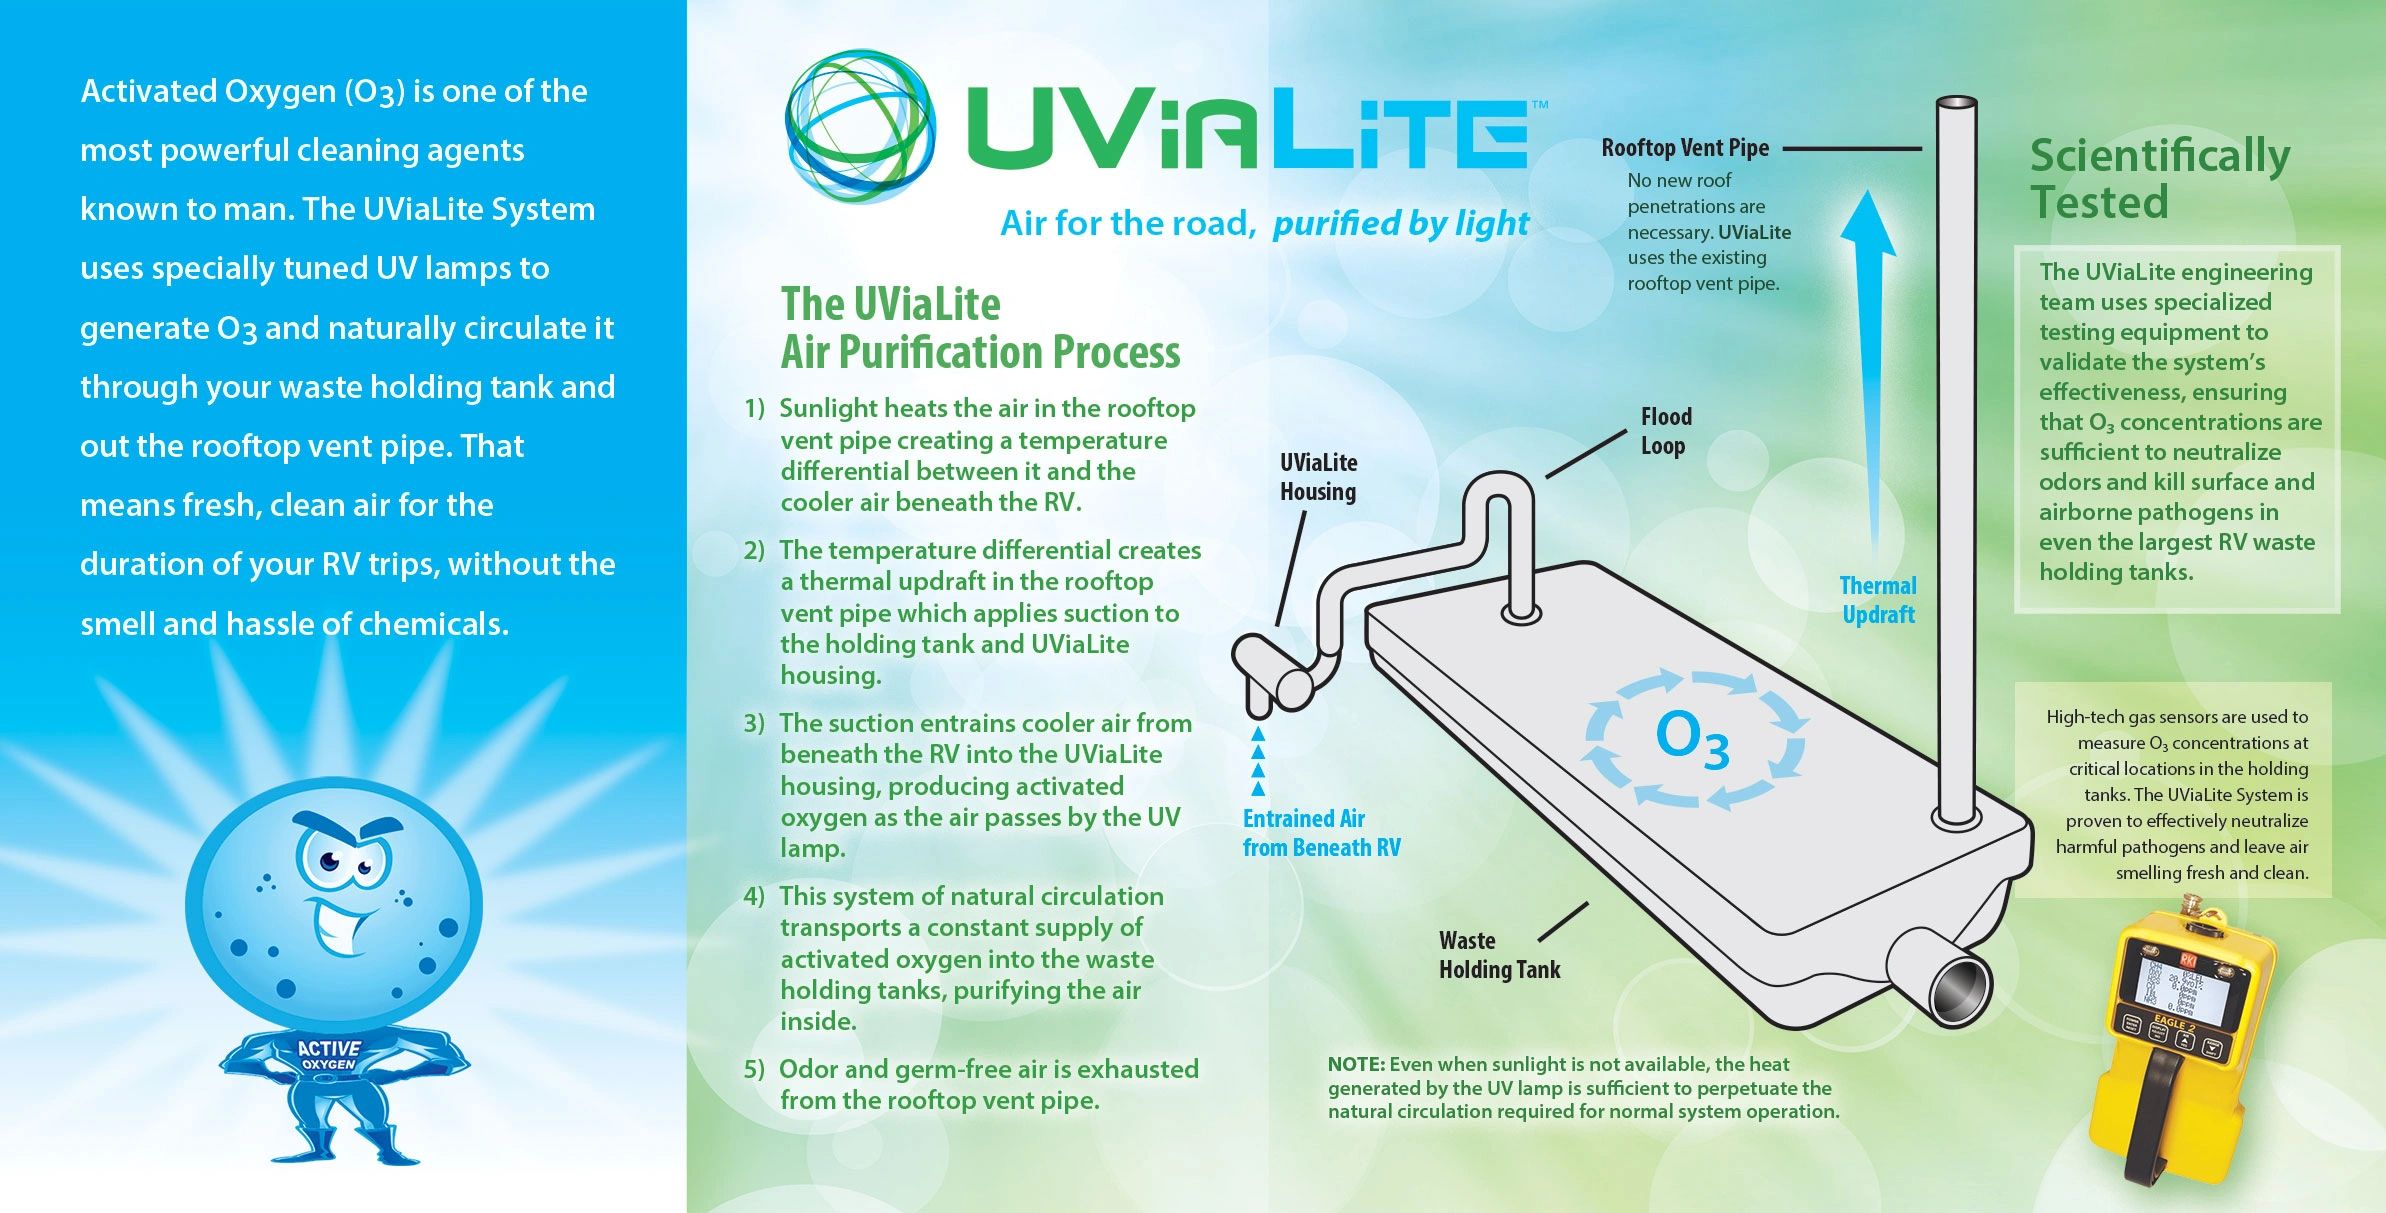 This infographic describes how the UViaLite System purifies the air in wastewater holding tanks.